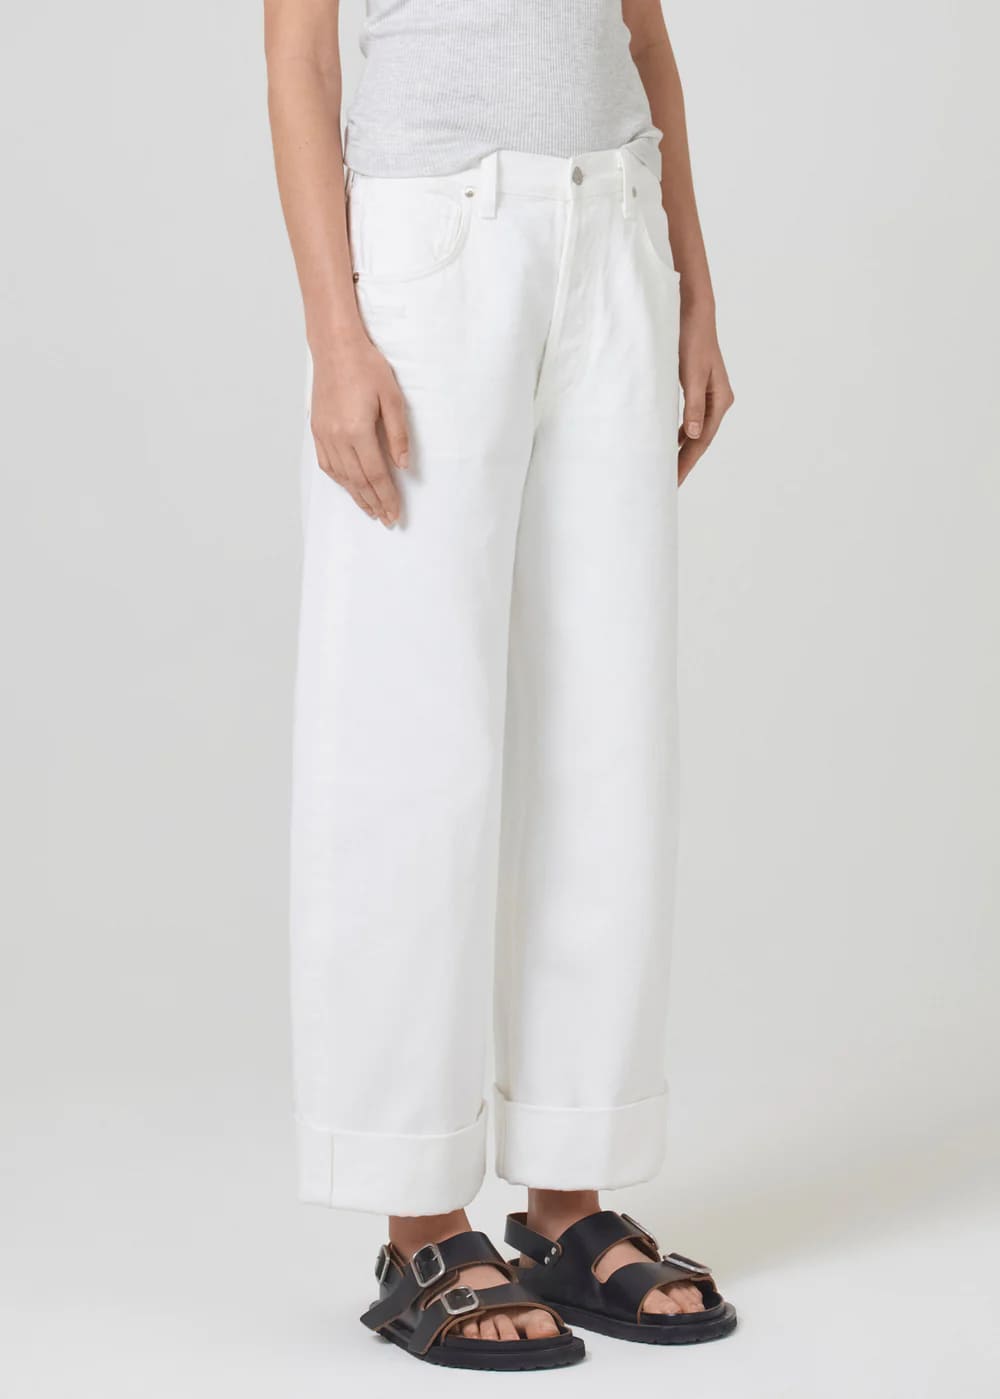 Citizens Of Humanity Ayla Baggy Cuffed Crop Jean in Serene White available at The New Trend Australia.